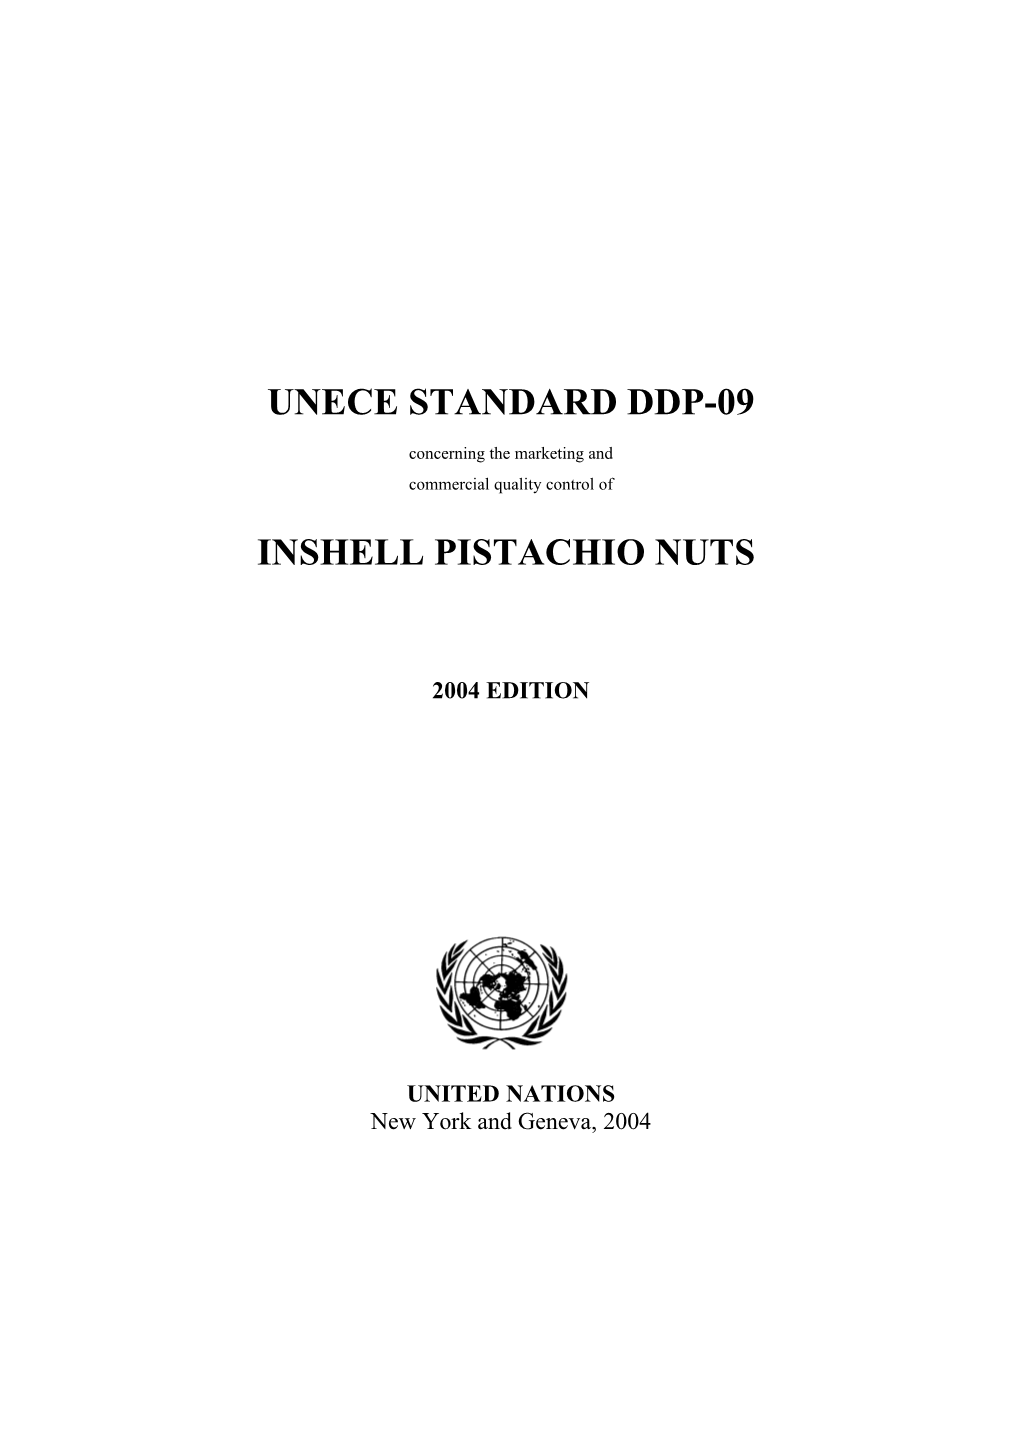 UNECE Standard for Inshell Pistachio Nuts (DDP-09)